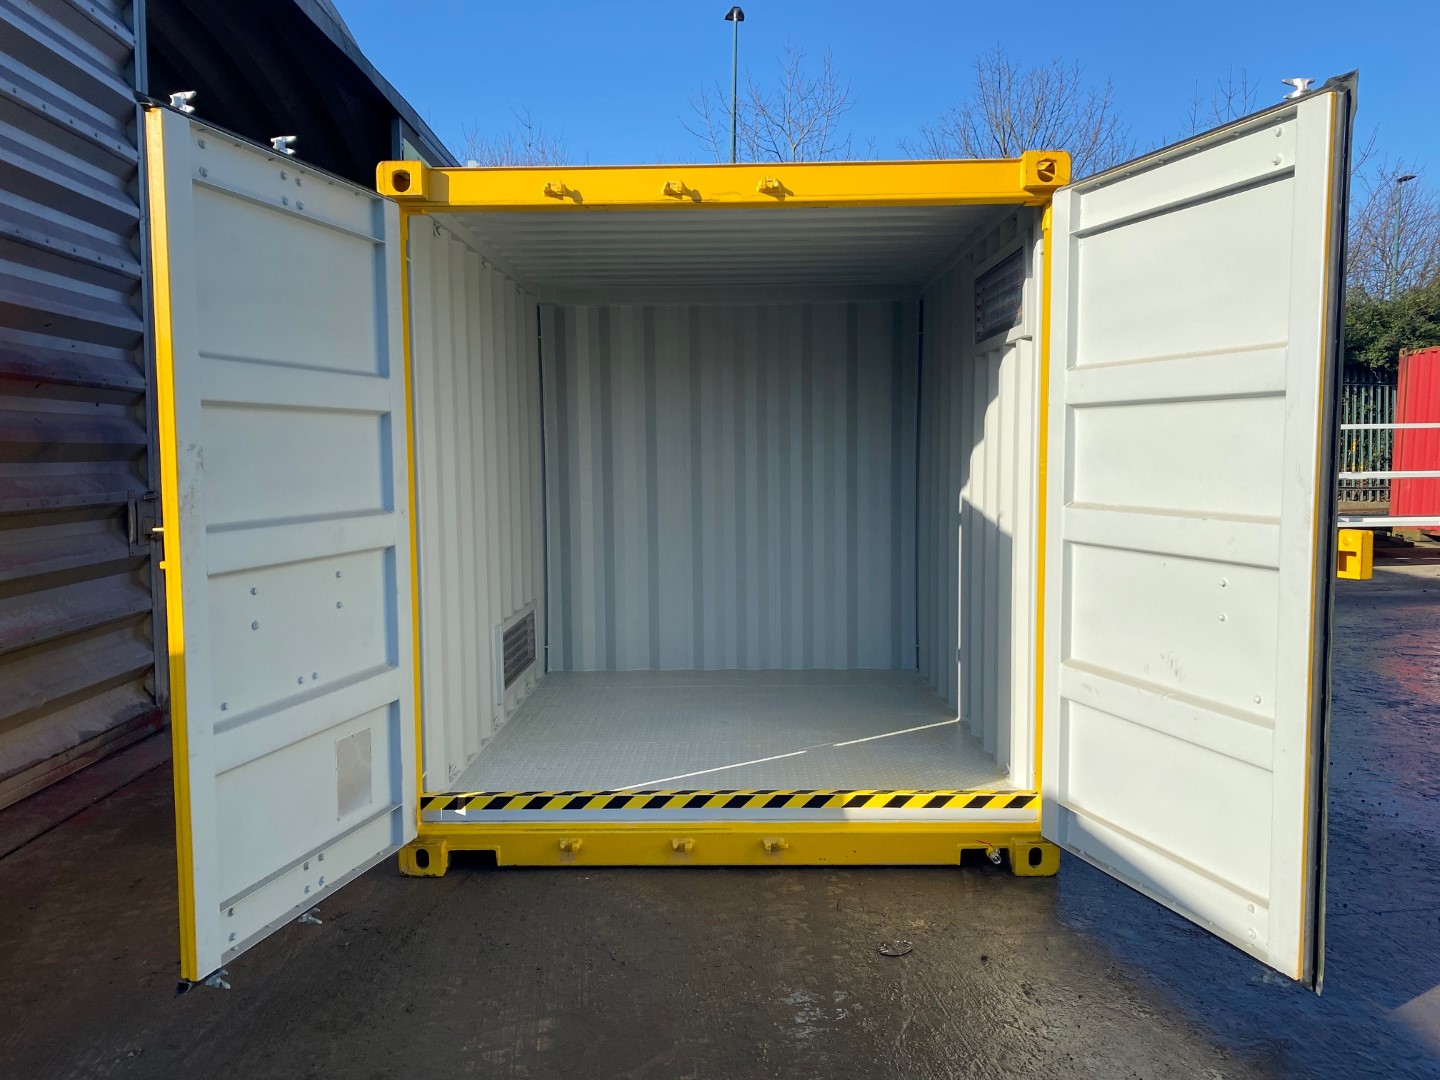 Providers of High-Security Chemical Storage Cabinets UK